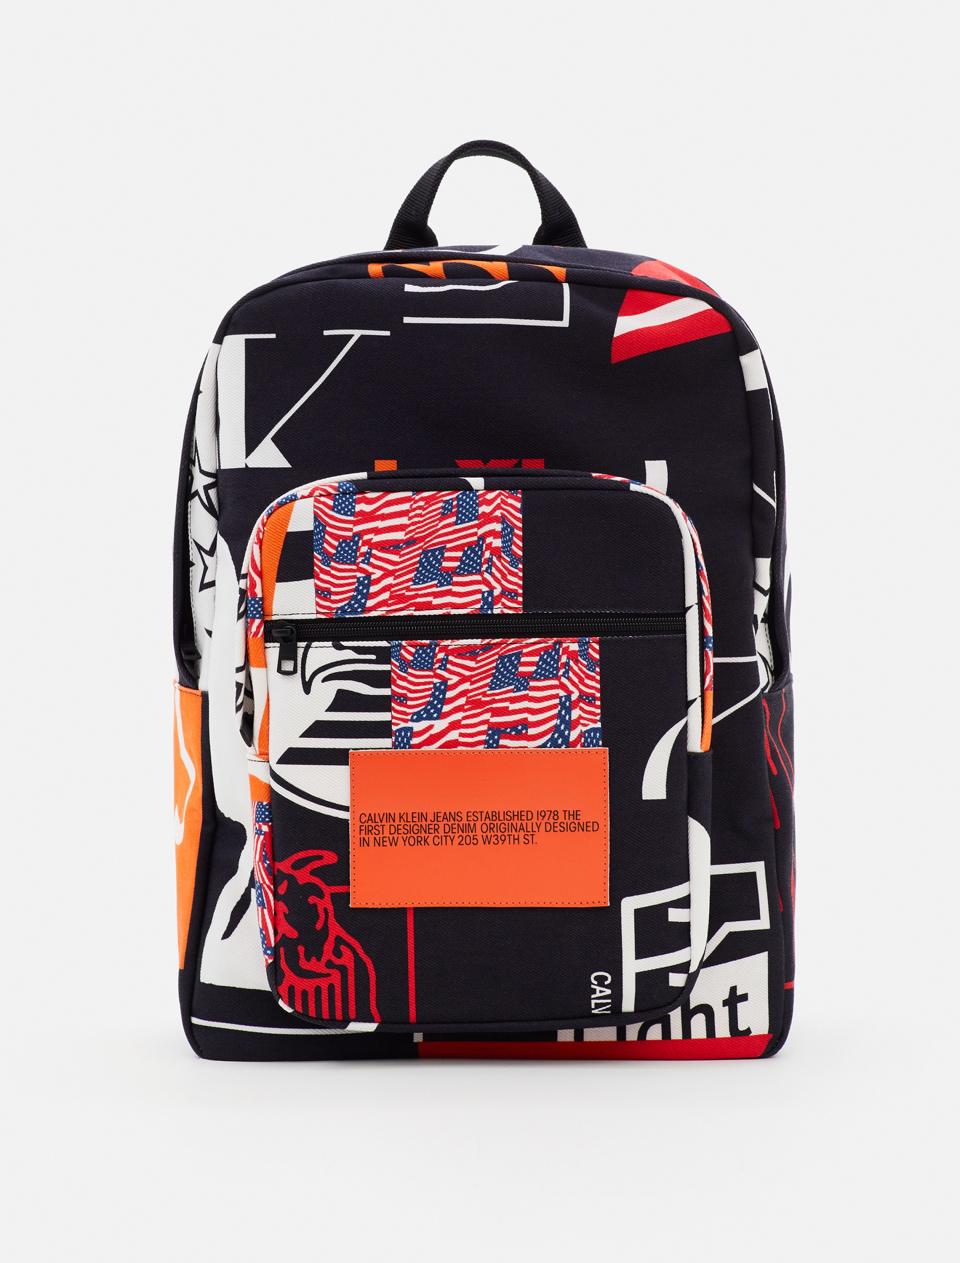 The assortment includes vivid landscape prints, graphic T-shirts, and a few clever accessories.